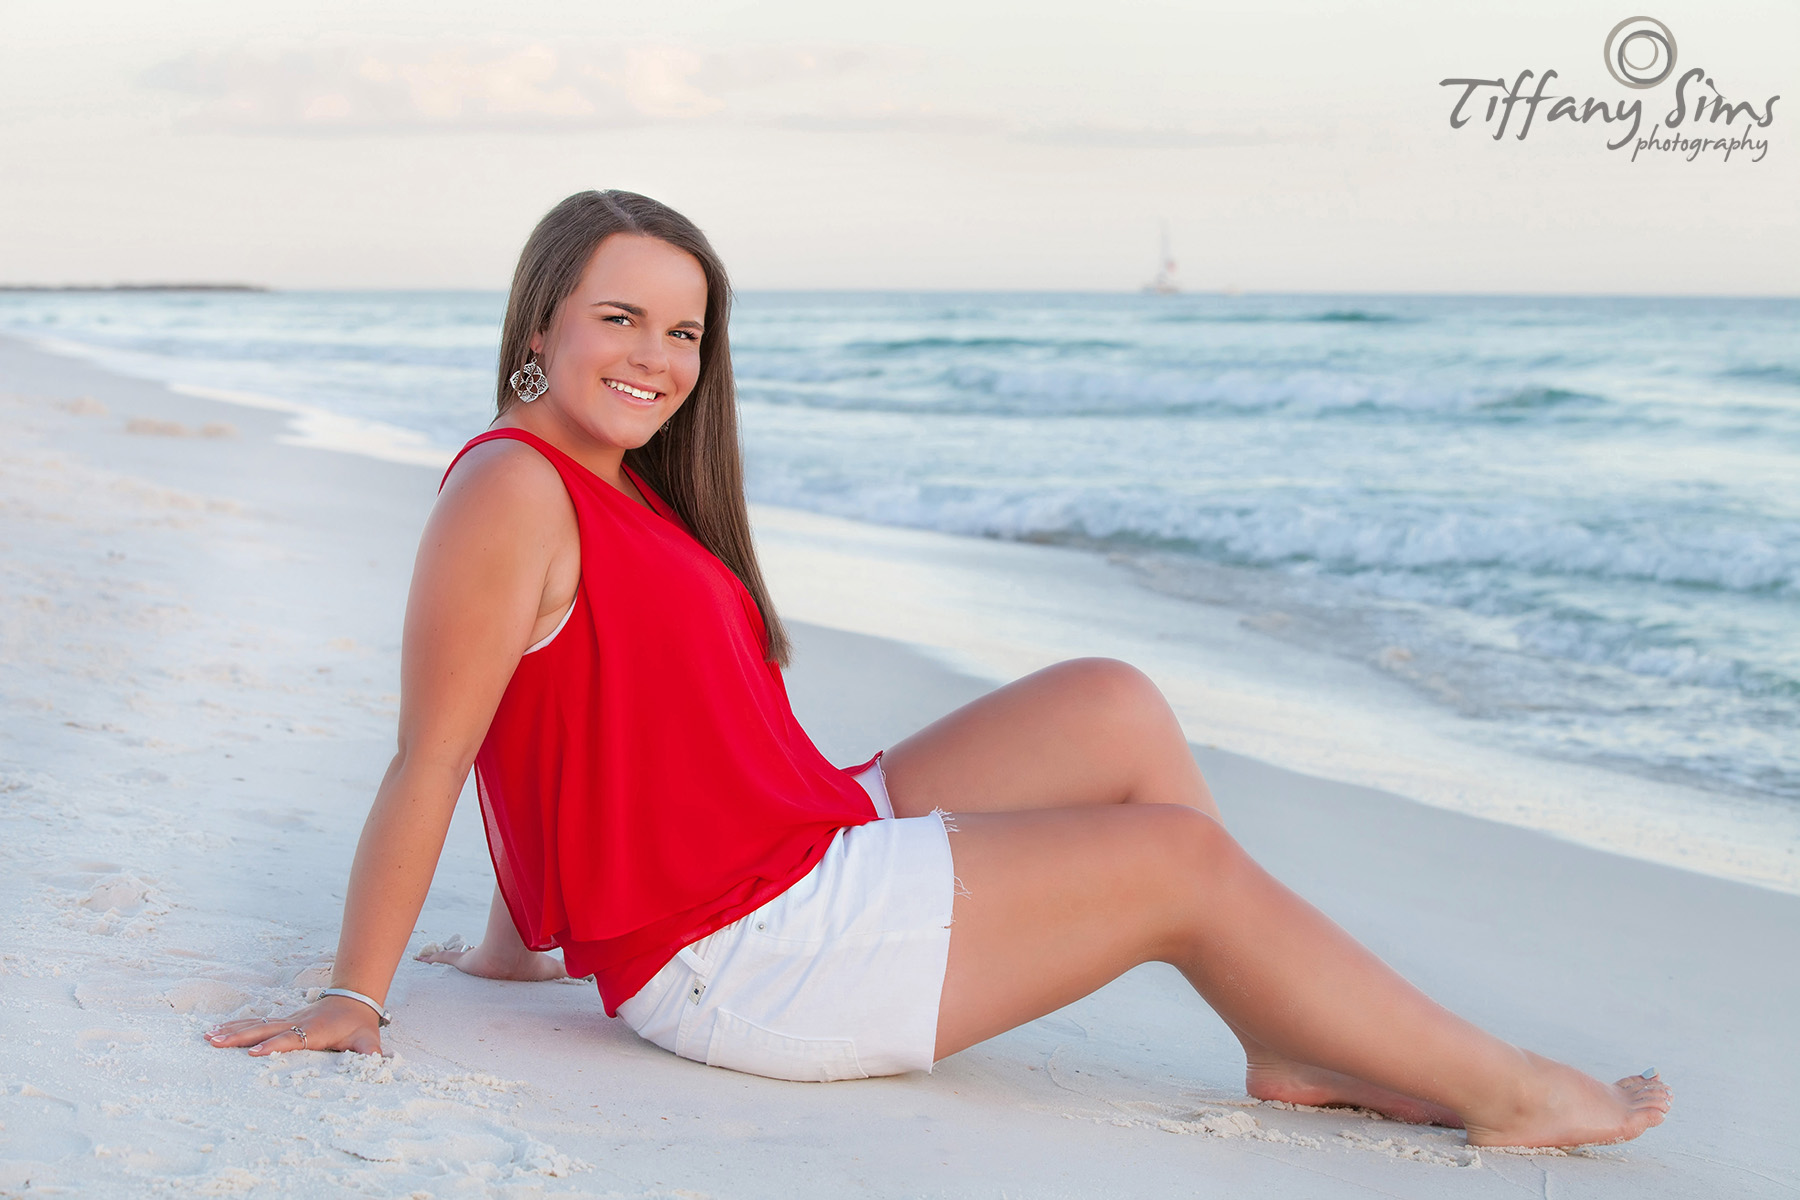 Destin Photography by Tiffany Sims Photography #destin #destinphotography #destinbeachphotography #30aphotography #30abeachphotography #destinphotographer #30aphotographer #fortwaltonbeachphotography #okaloosaislandphotography | RC39rw